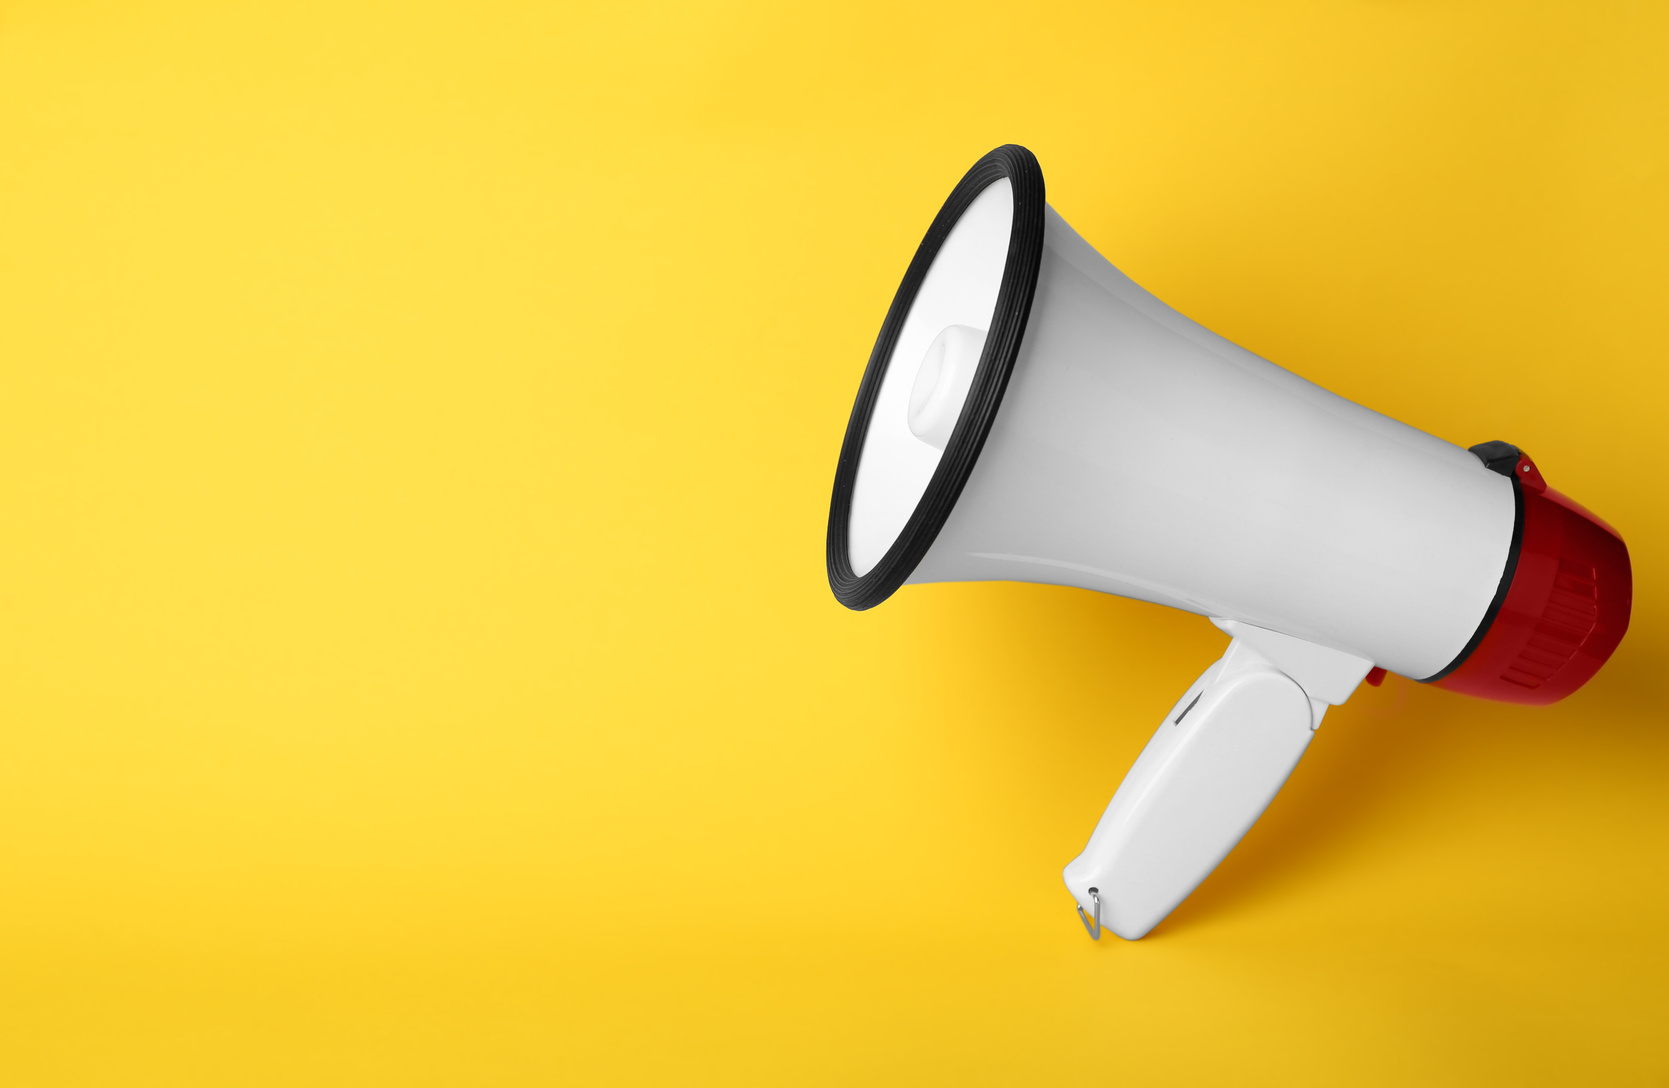 Electronic Megaphone on a Yellow Background